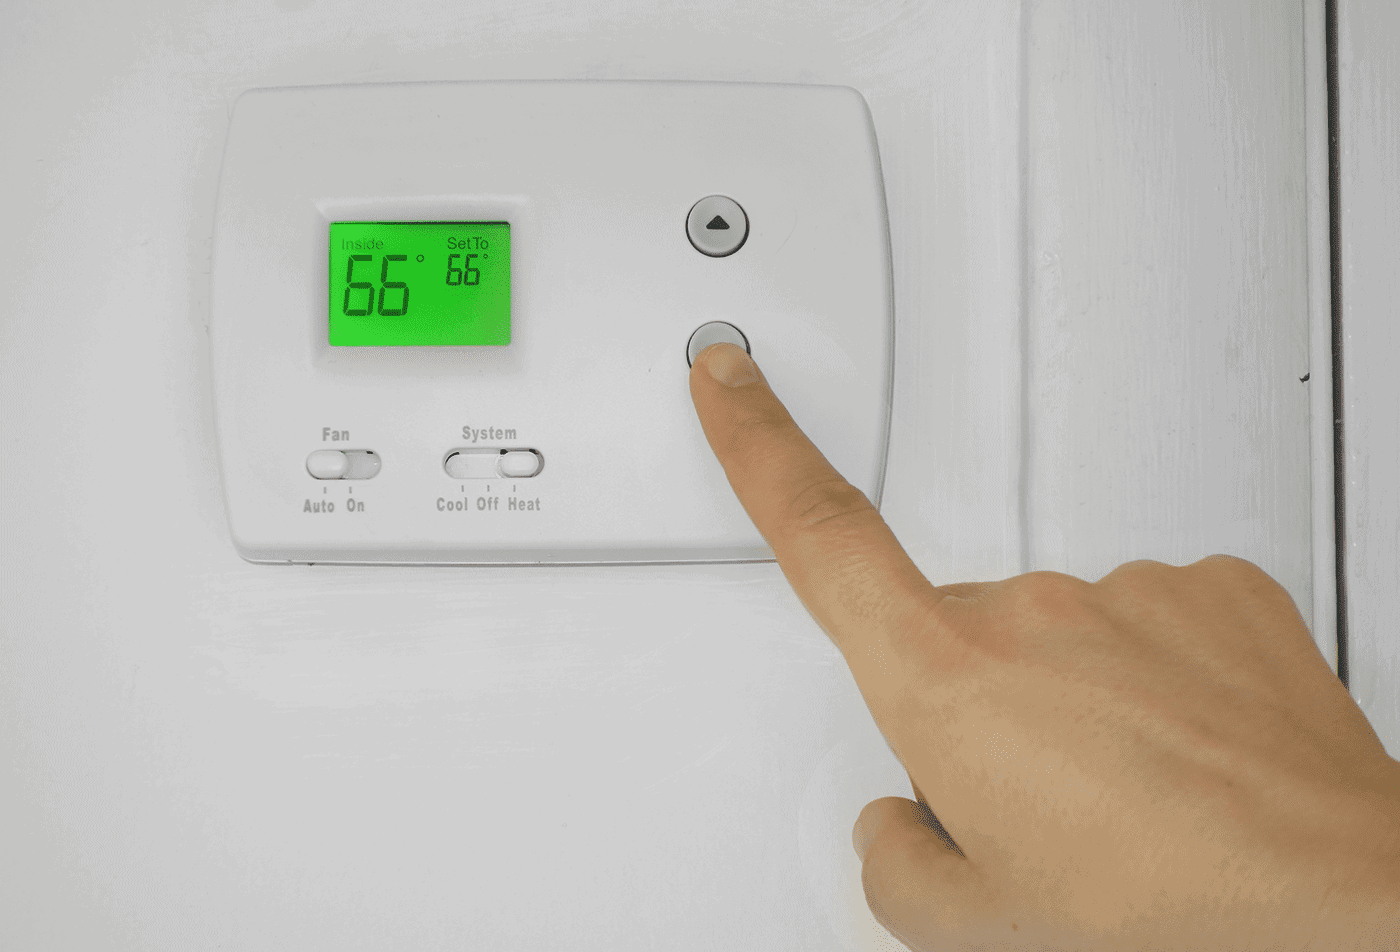 Cold spots and constantly needing to adjust the thermostat can be signs of poor insulation